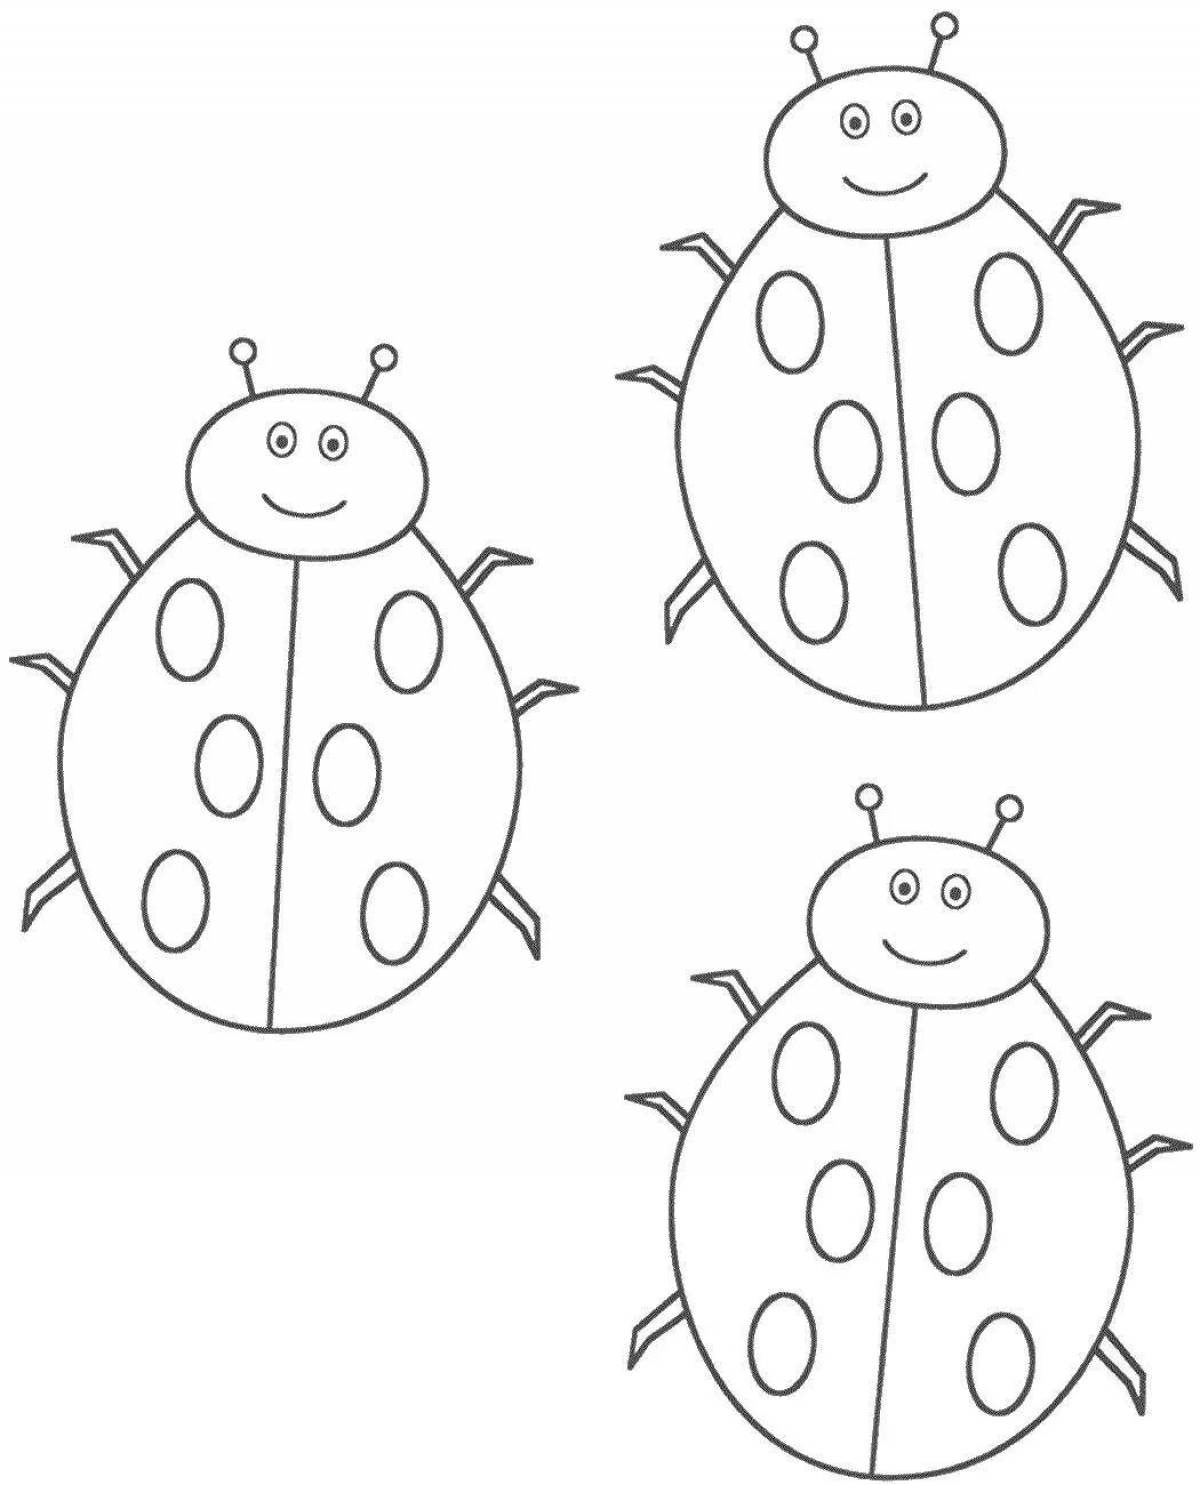 Unique beetle coloring book for 3-4 year olds